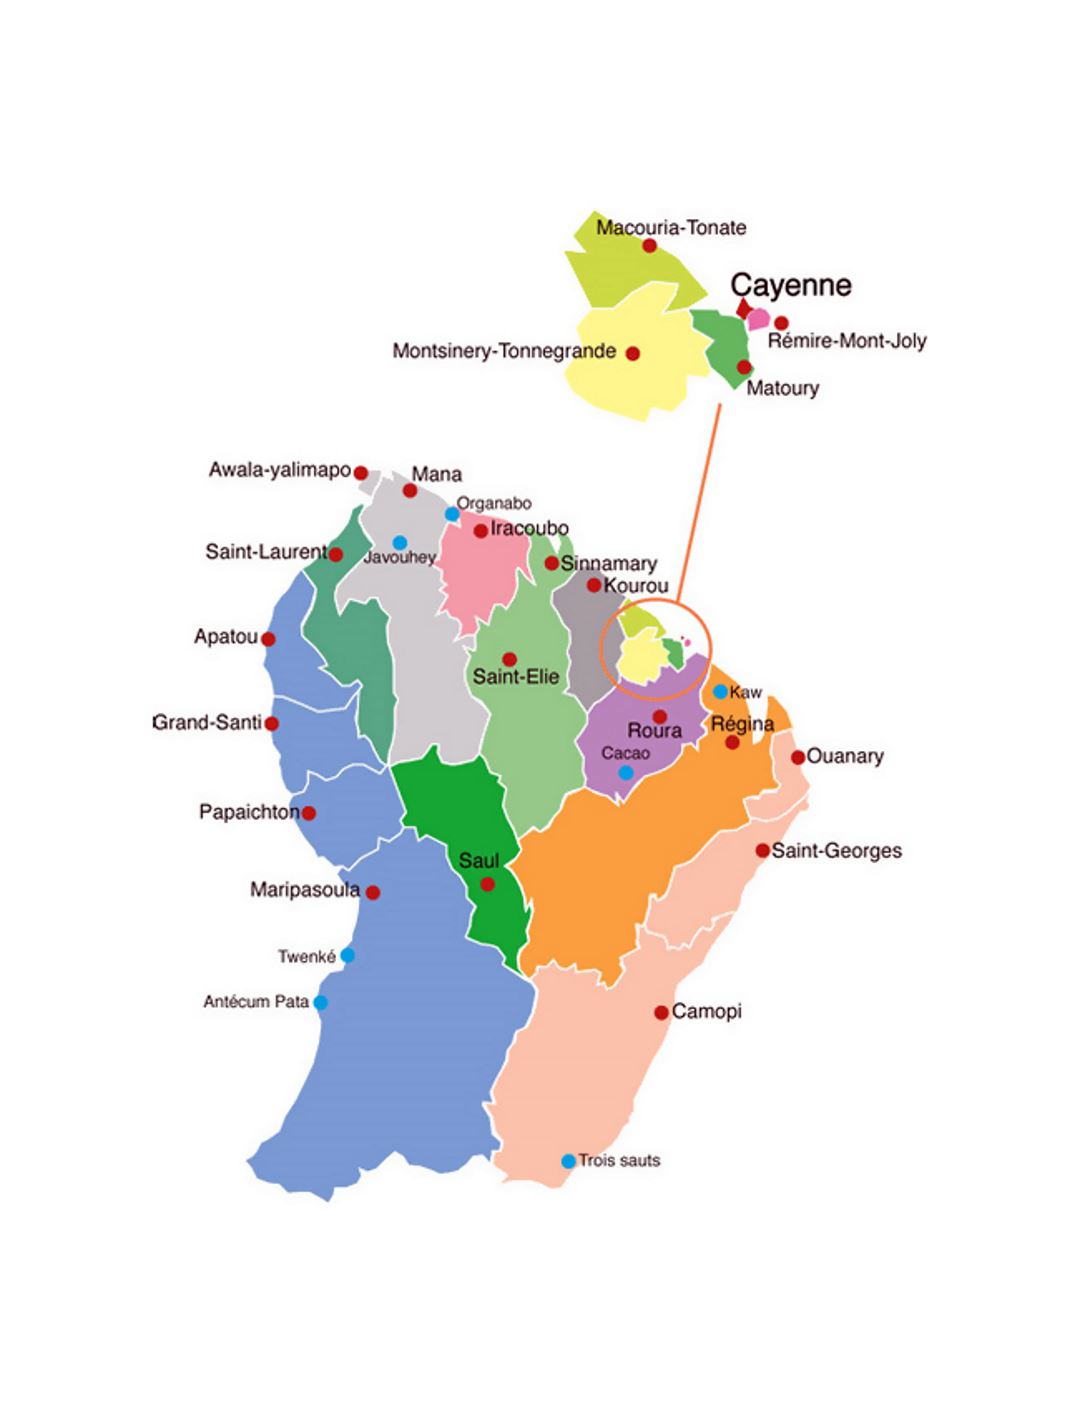 Administrative divisions map of French Guiana